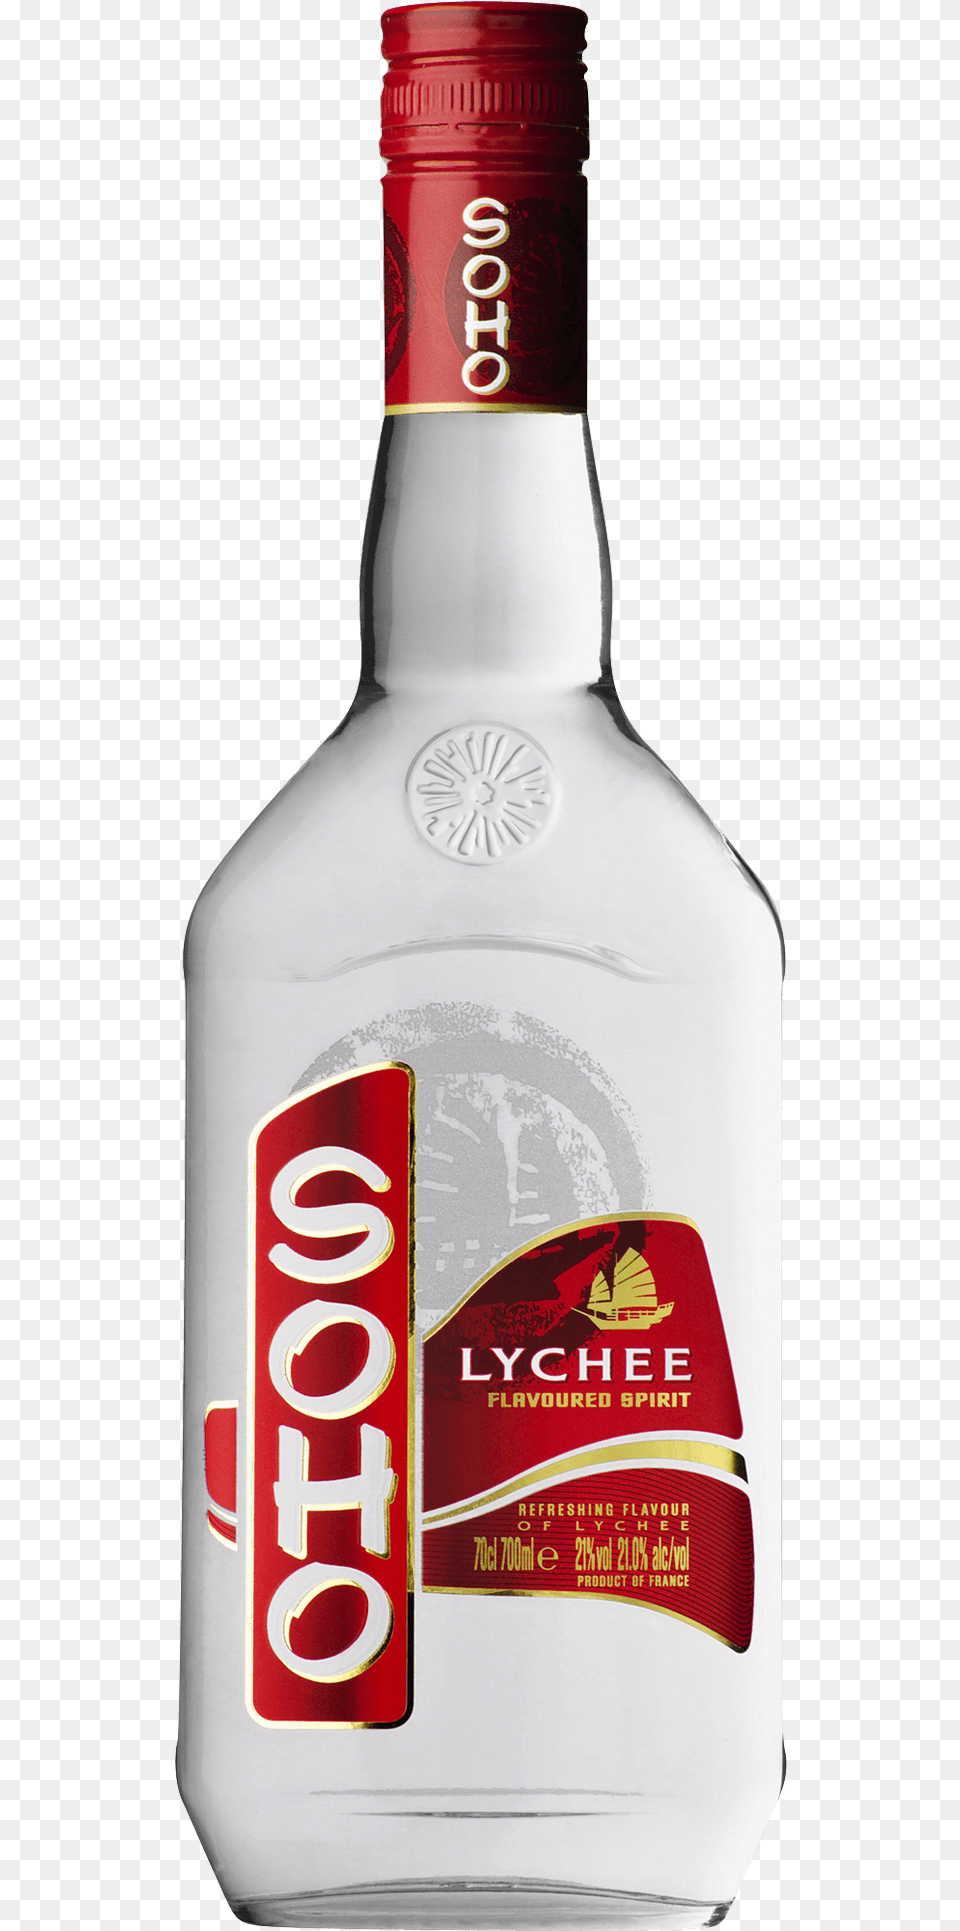 Soho Lychee, Alcohol, Beverage, Liquor, Beer Free Png Download